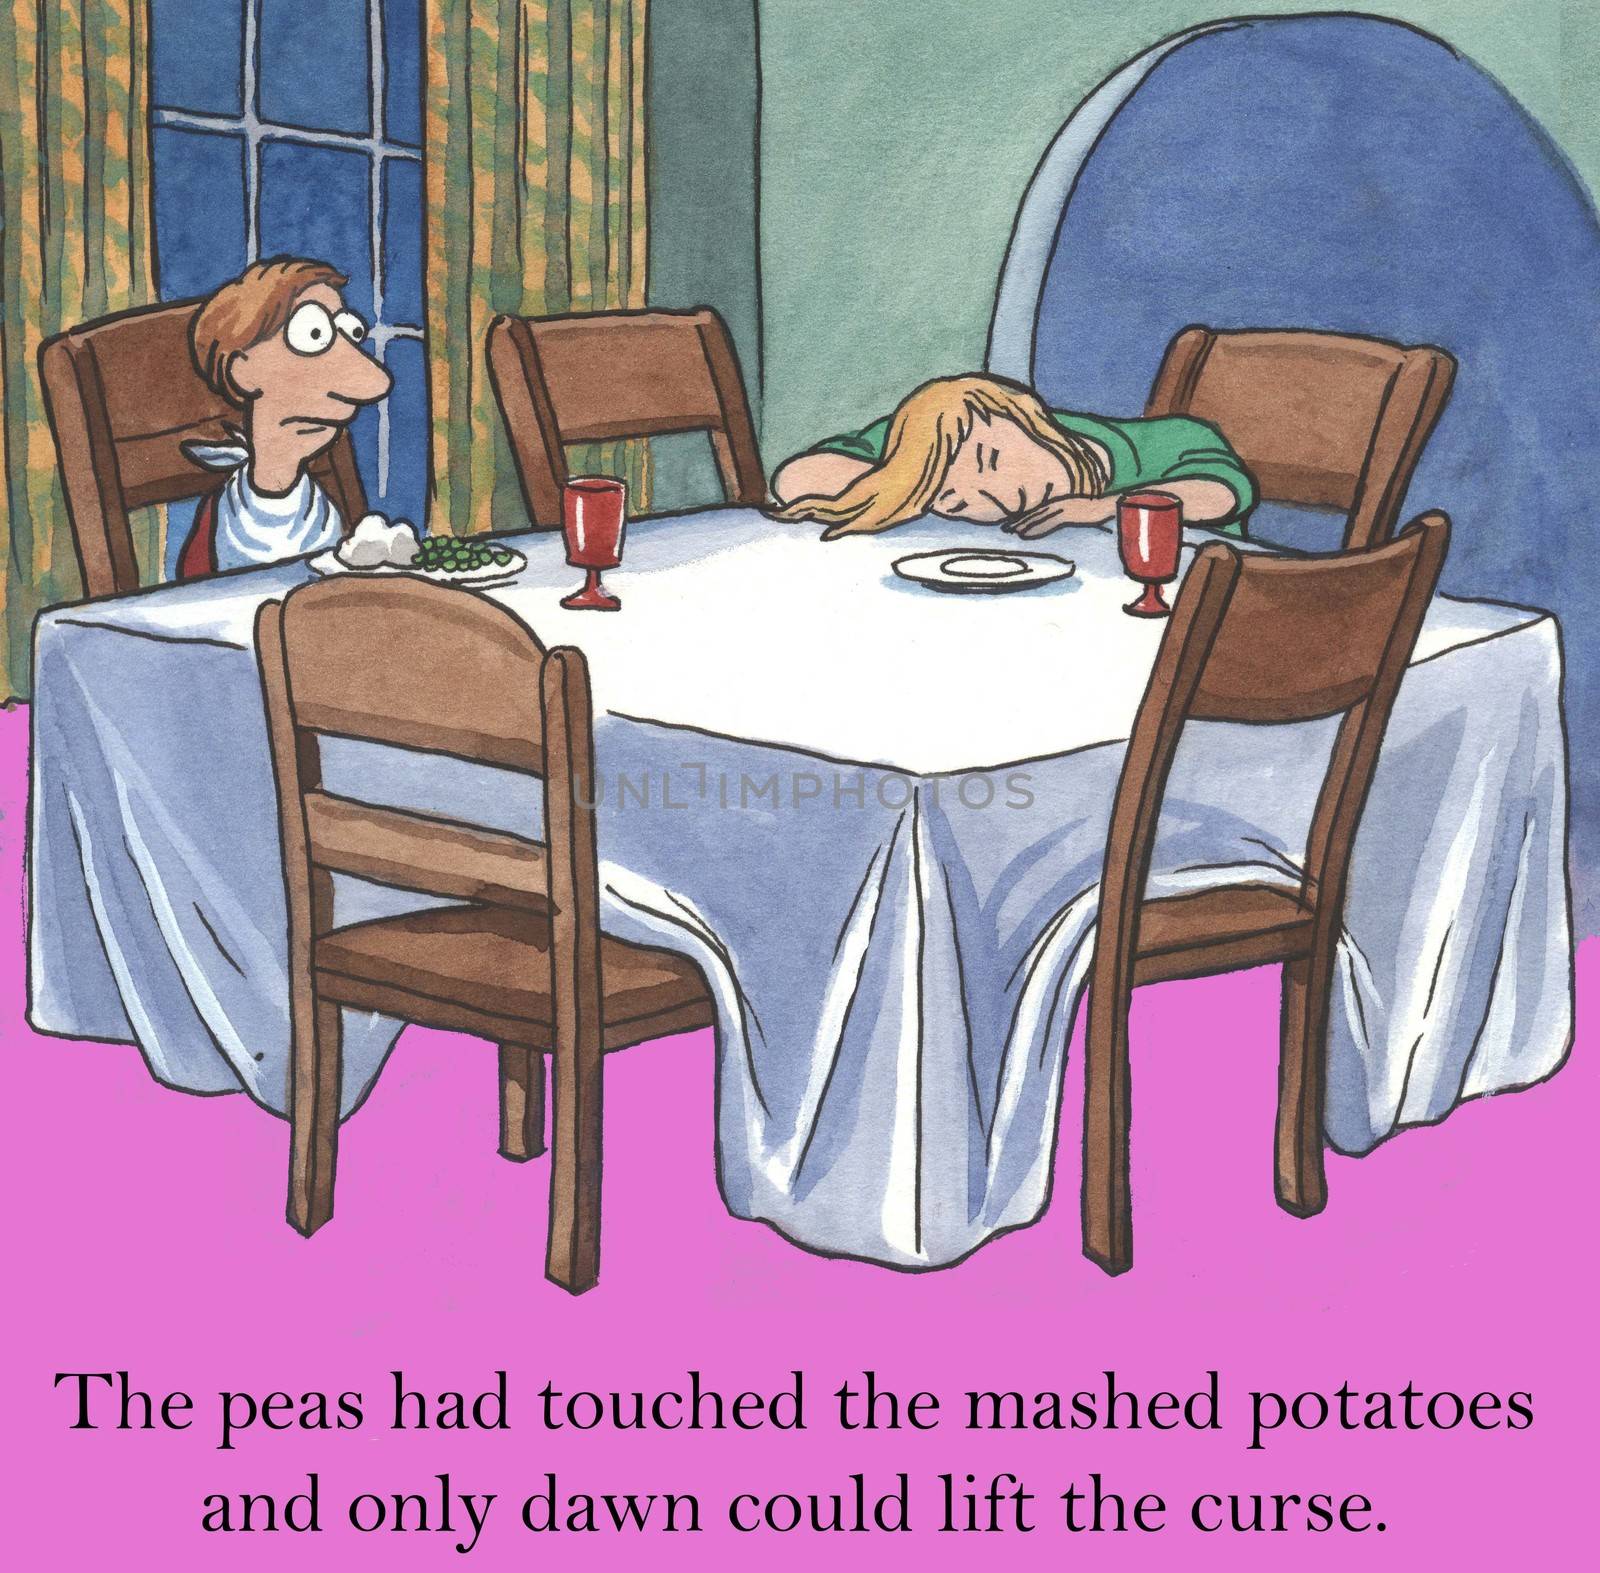 The peas had touched the mashed potatoes and only dawn could lift the curse.